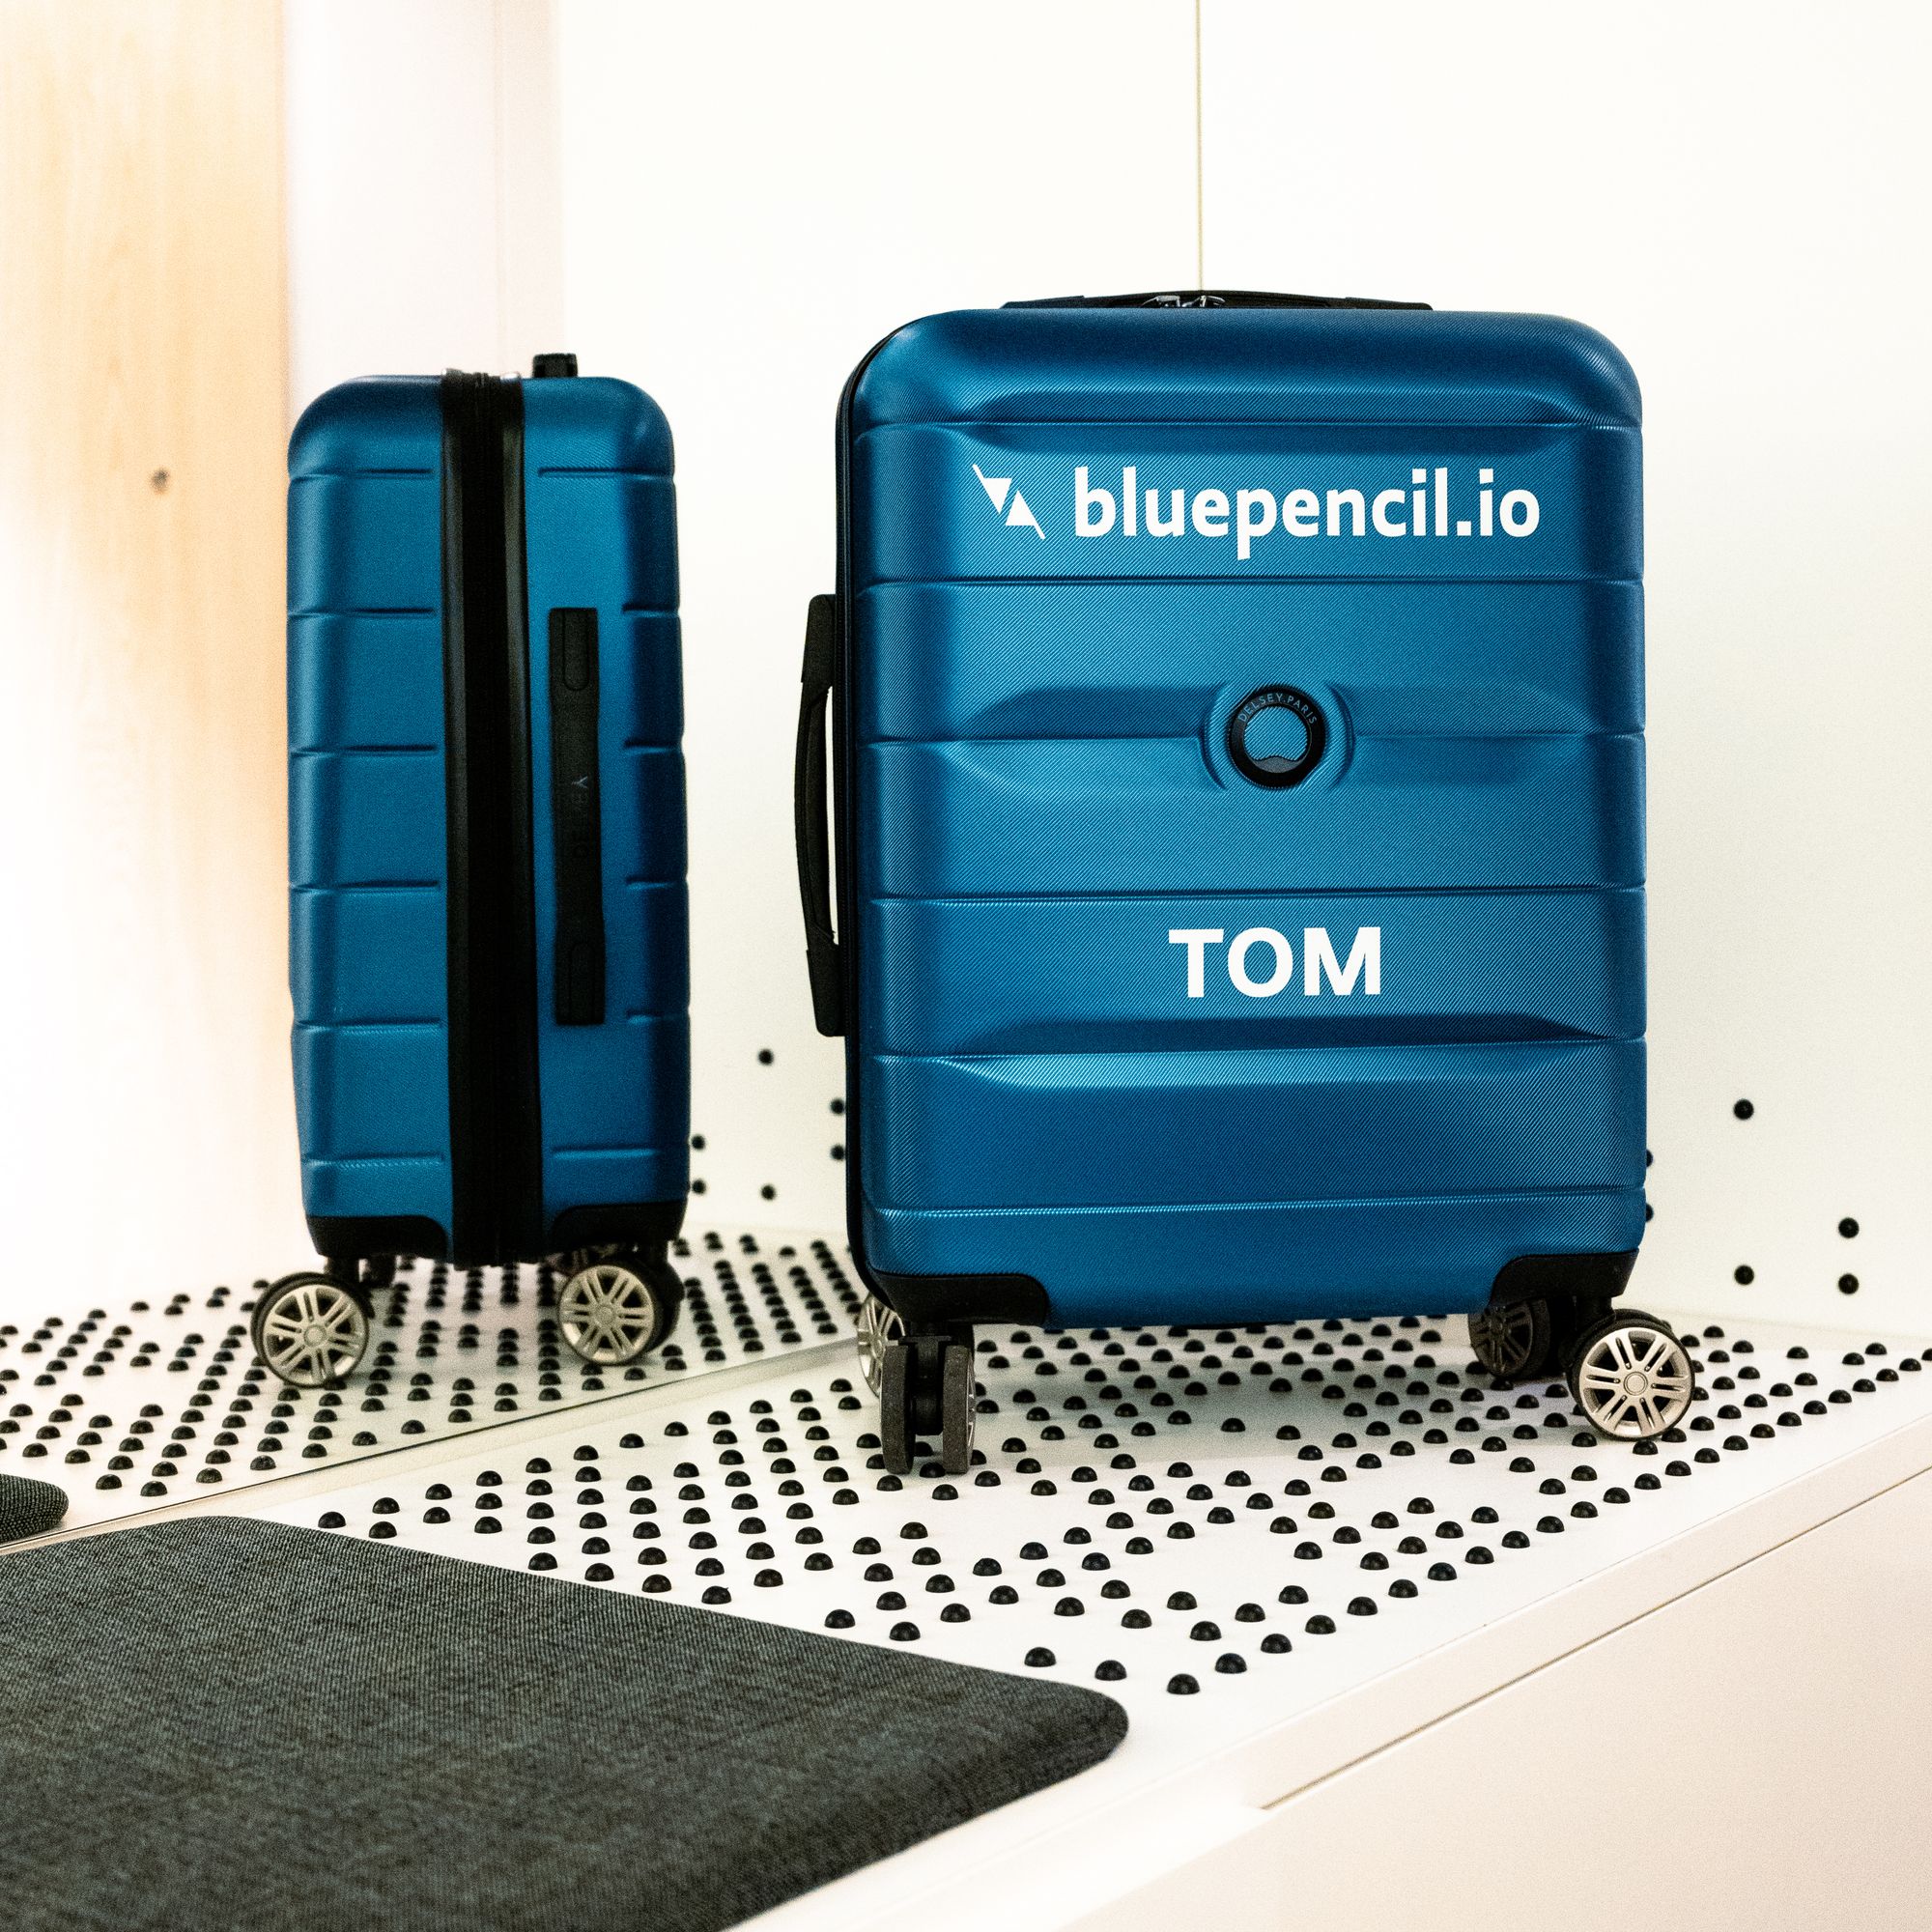 Trolly, stickered with bluepencil.io and Tom - ready to be filled with insights and experiences